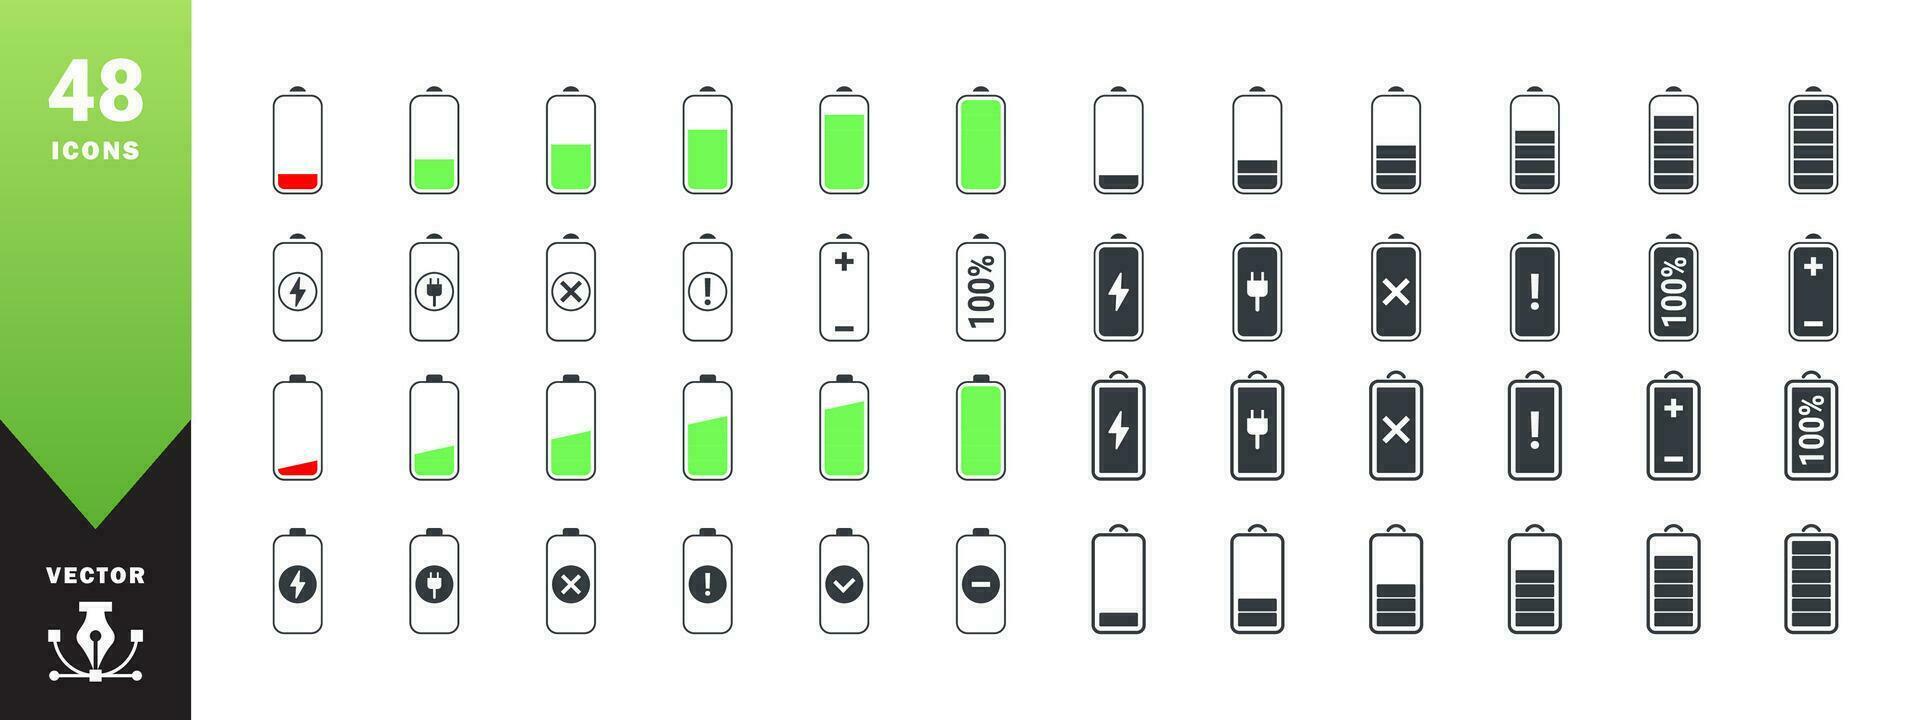 Battery charging icons set. Phone charging indicator. Battery charging status. Vector scalable graphics